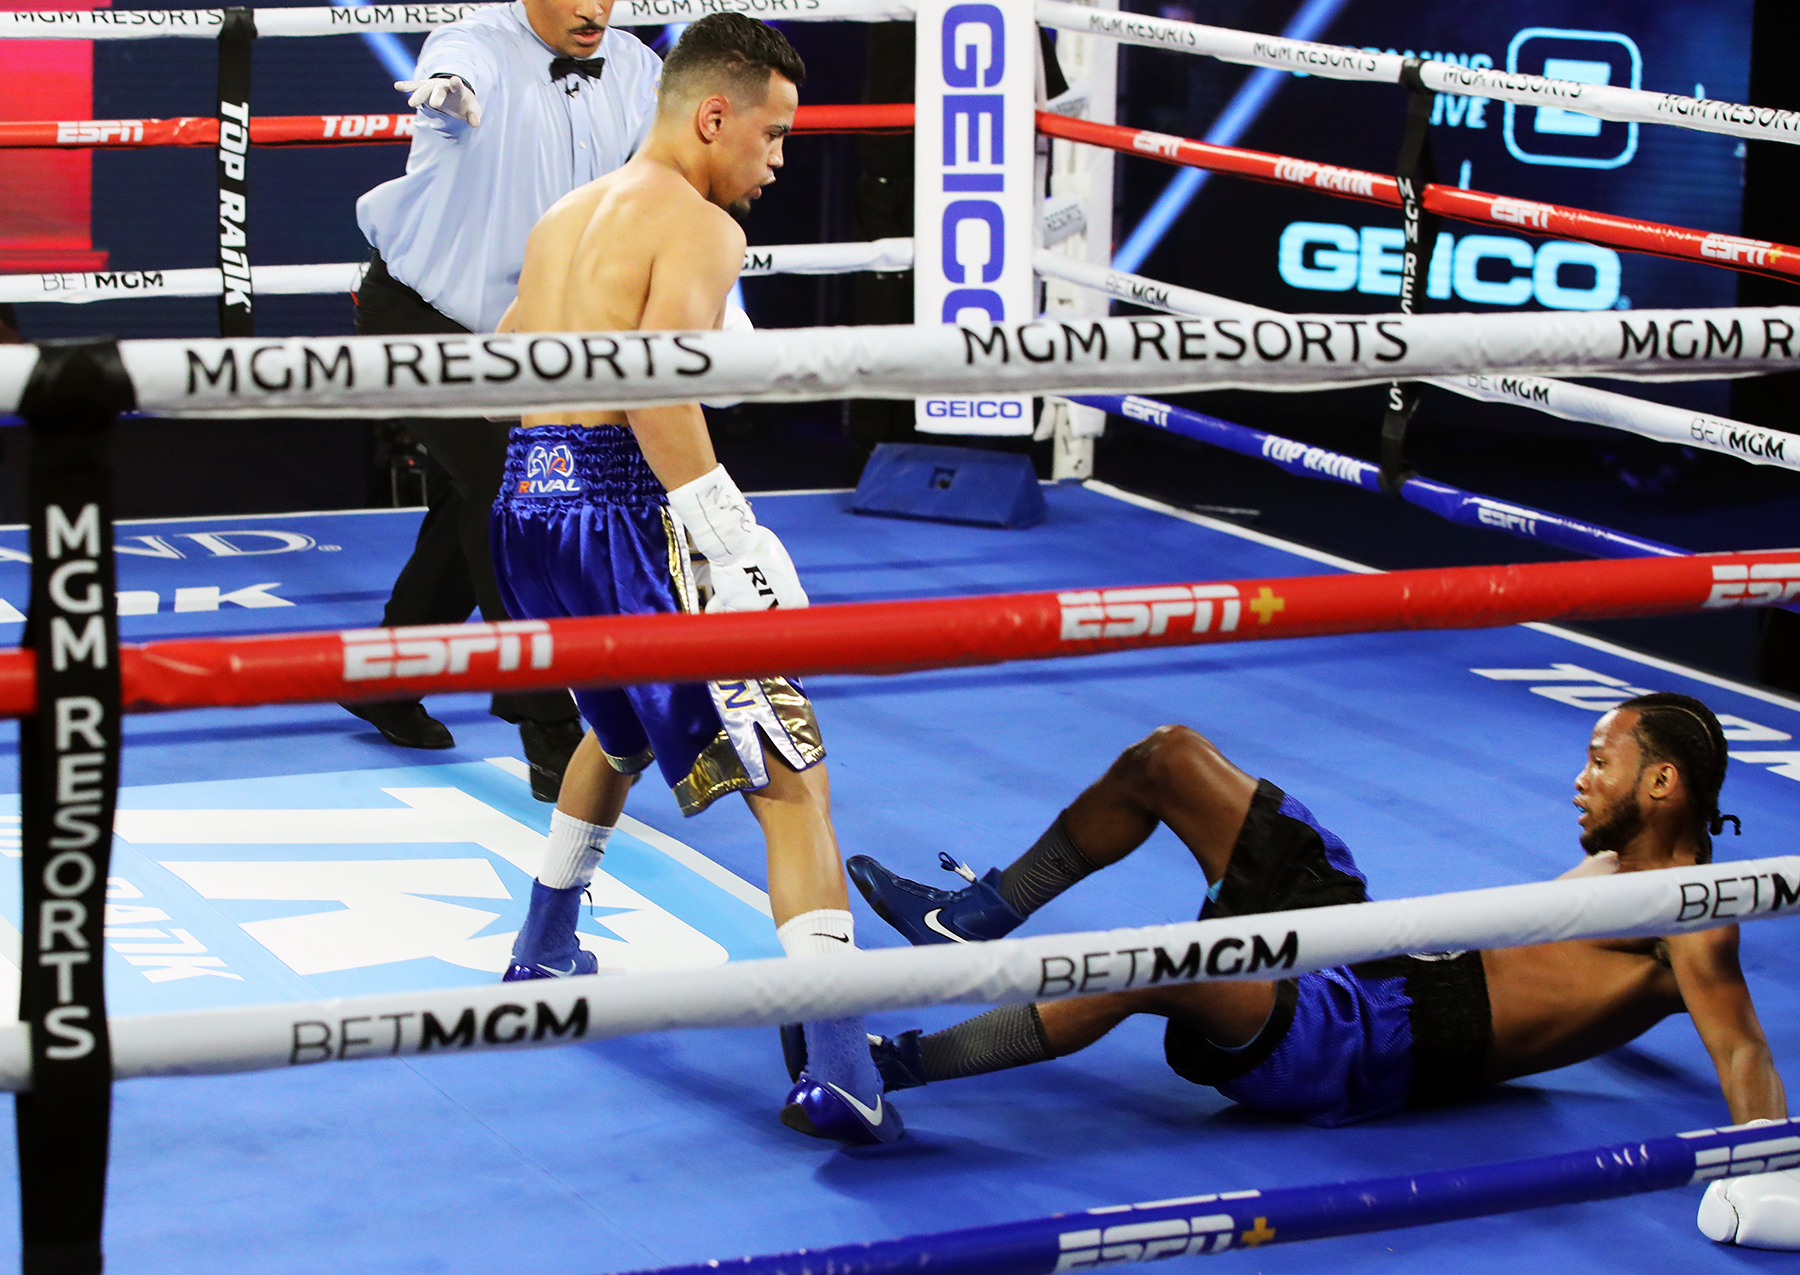 Robeisy Ramirez scores first round KO to welcome back Top Rank boxing - The Ring